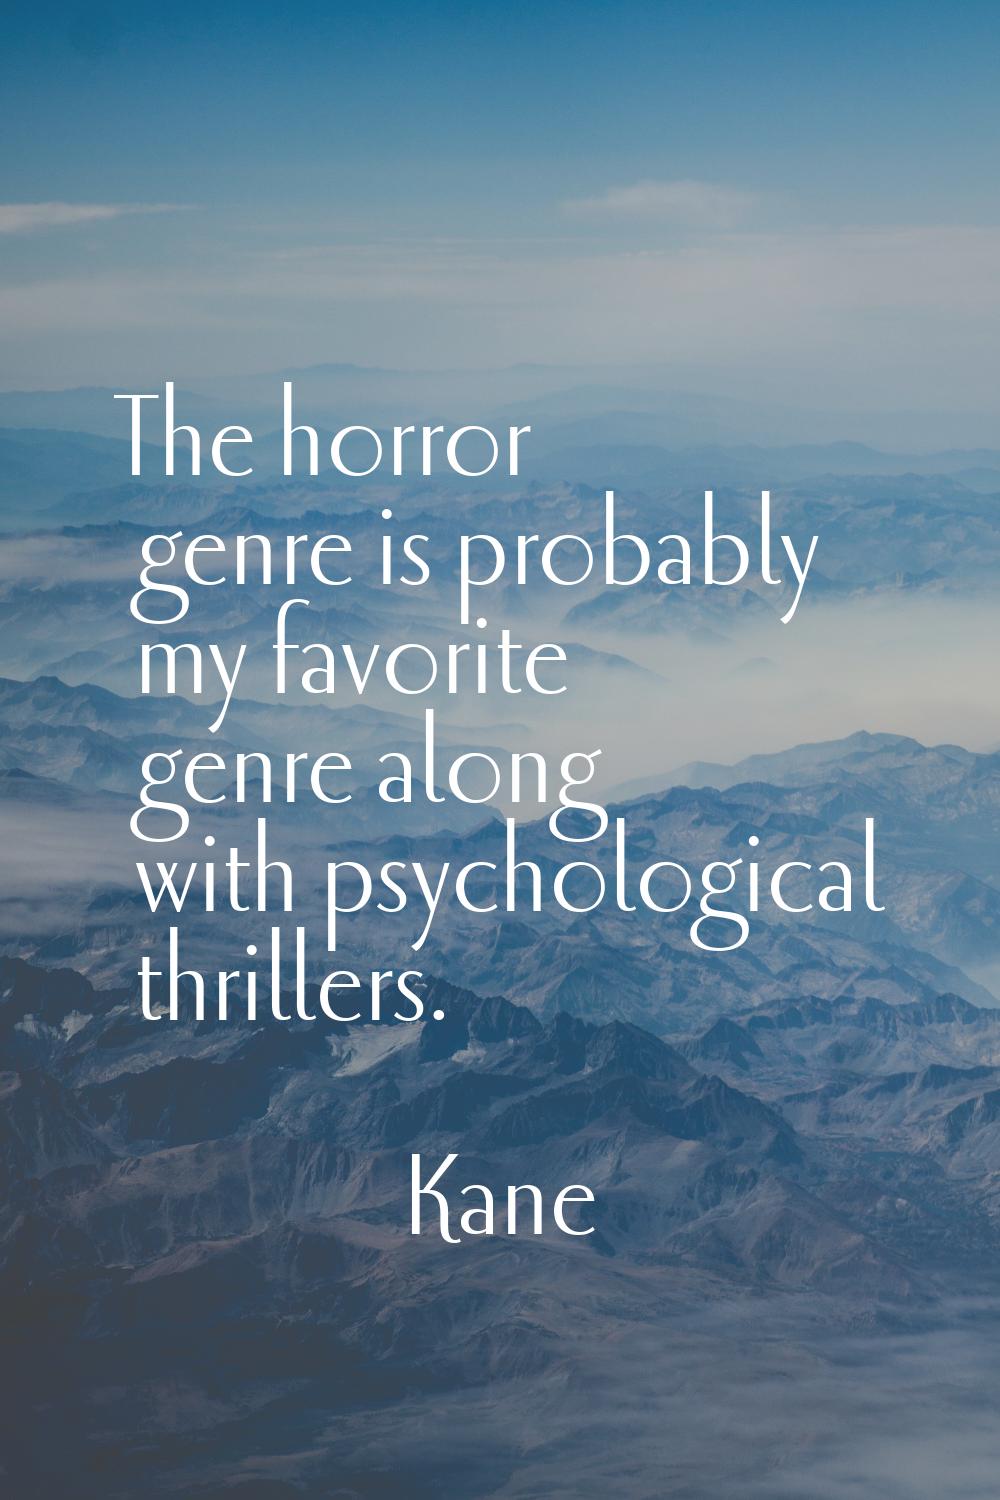 The horror genre is probably my favorite genre along with psychological thrillers.